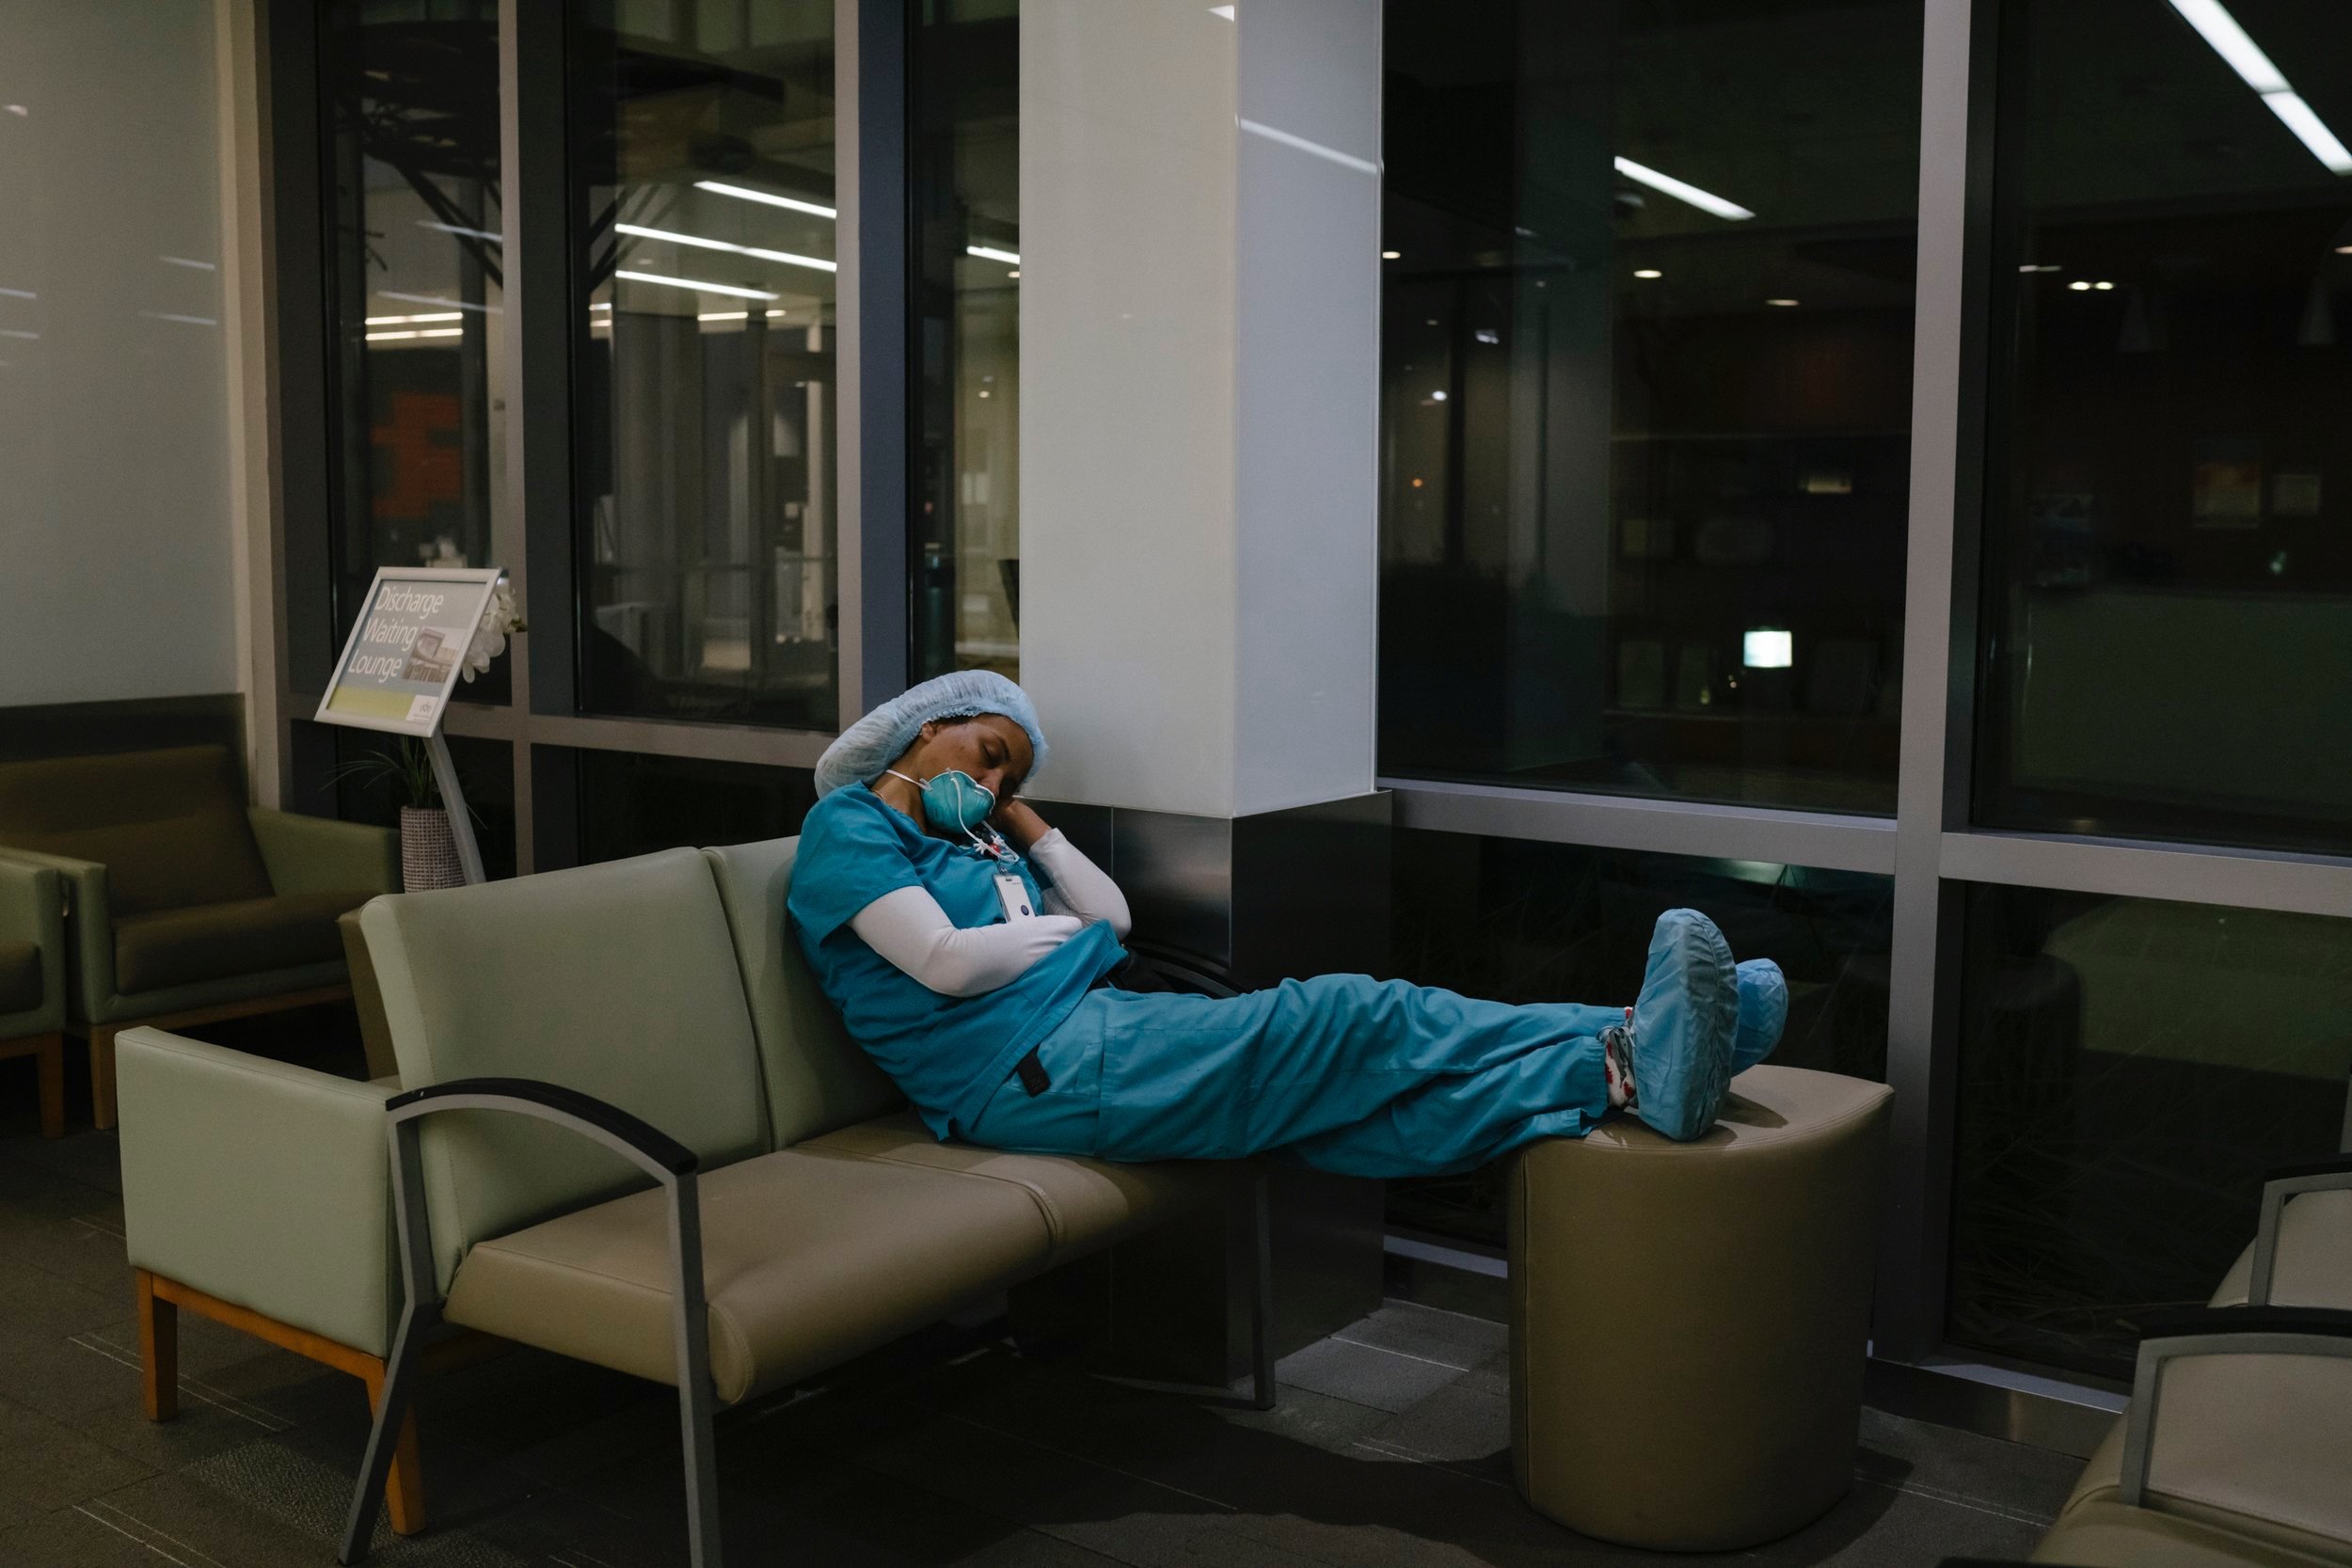  A healthcare workers sleeps during a break at 2 AM in the lobby. 